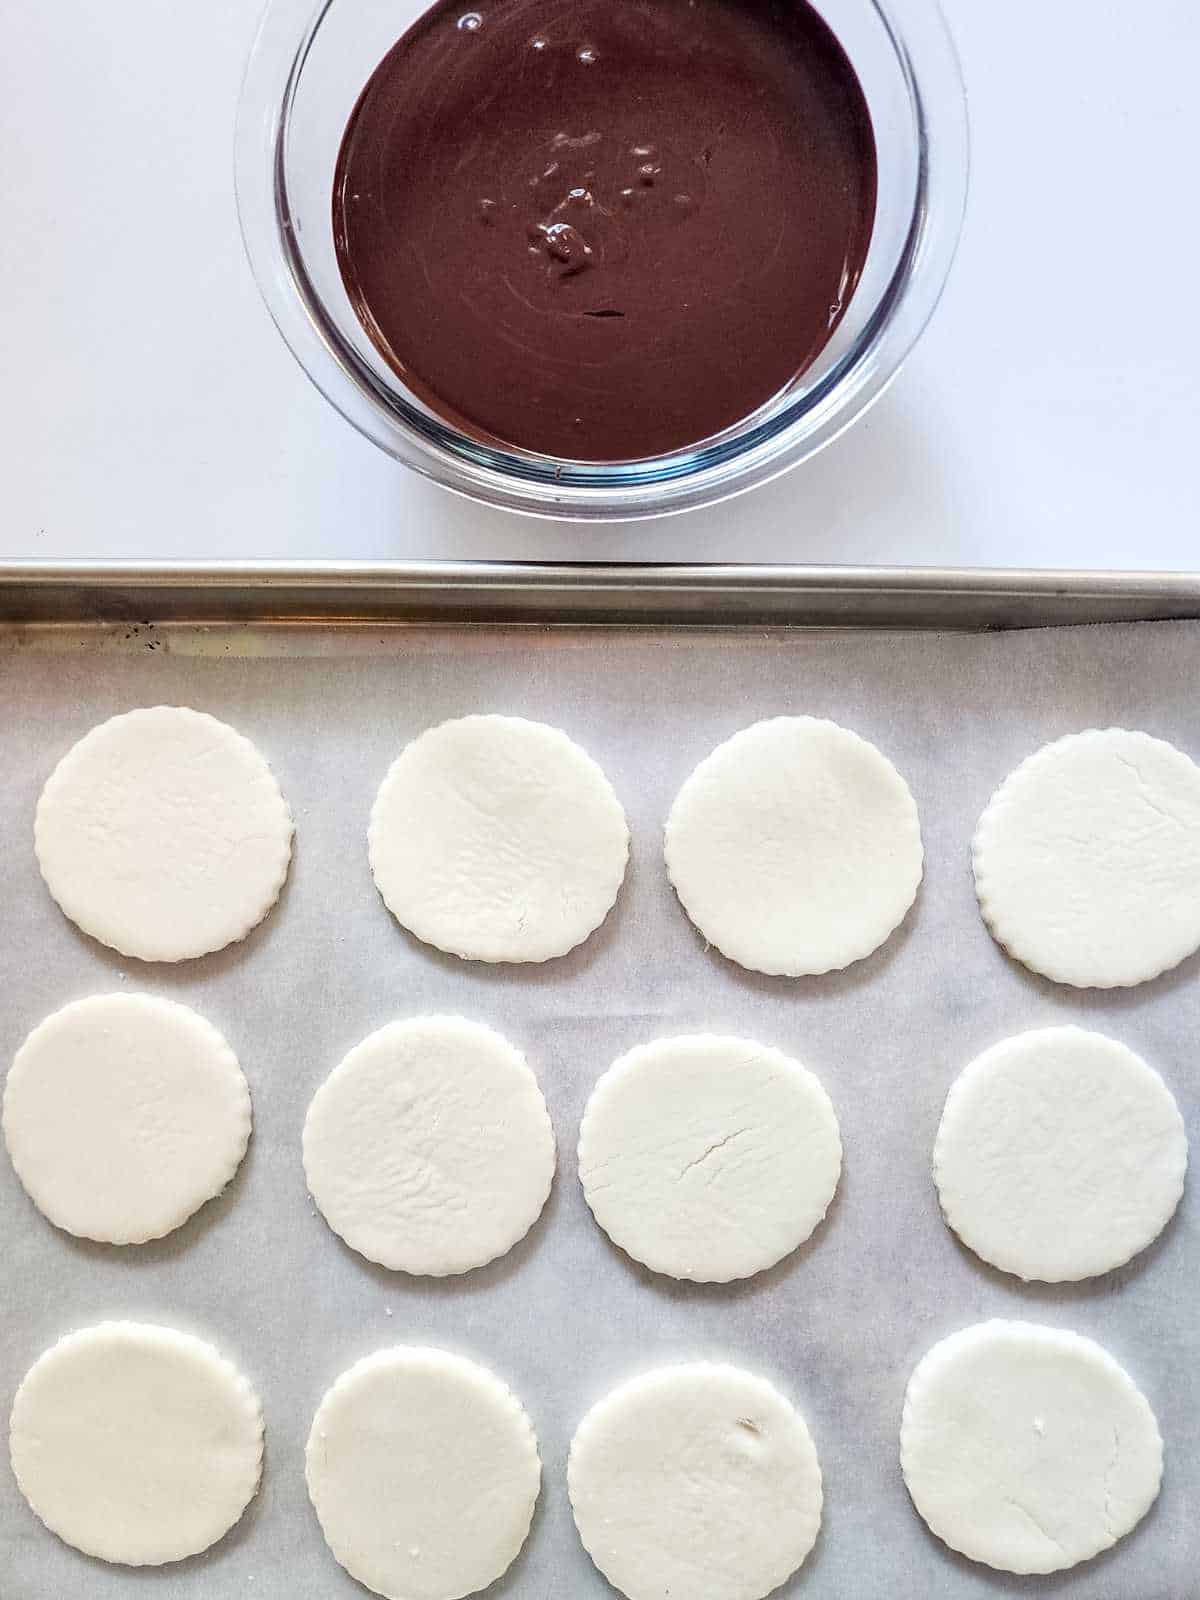 chilled candy dough circles with melted chocolate nearby.